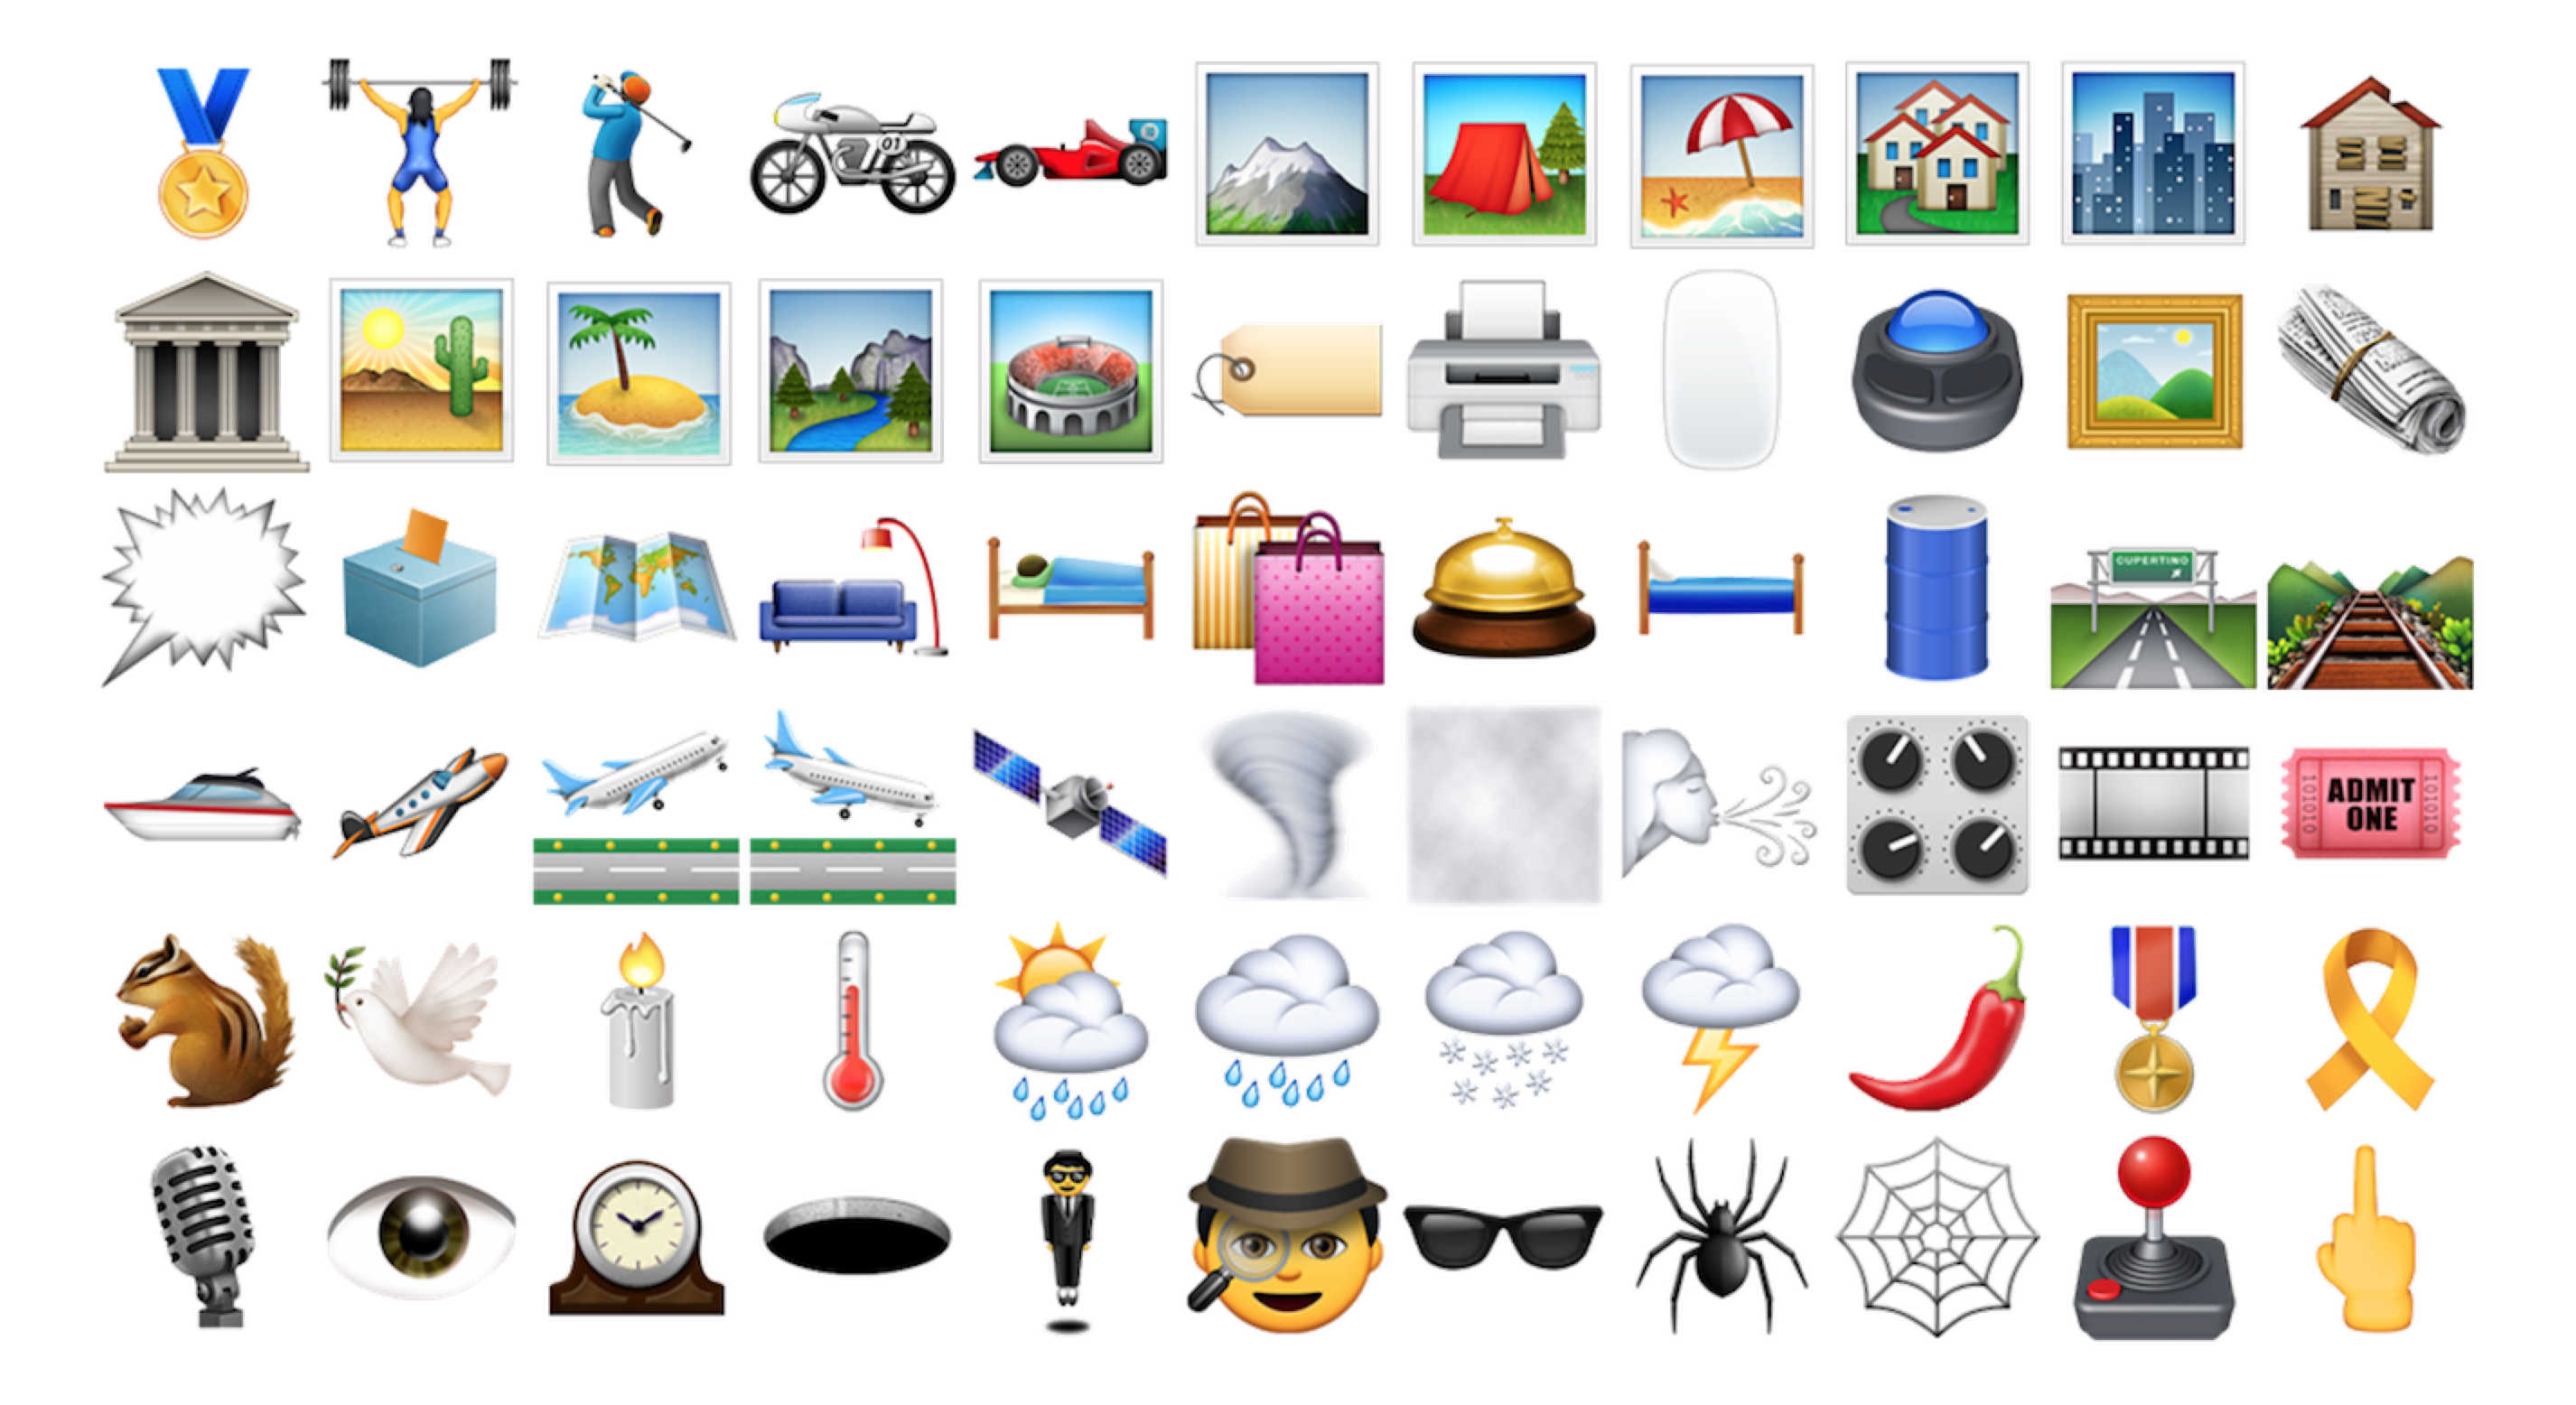 iOS 9.1 is here with new emoji, wallpaper and more. Cult of Mac